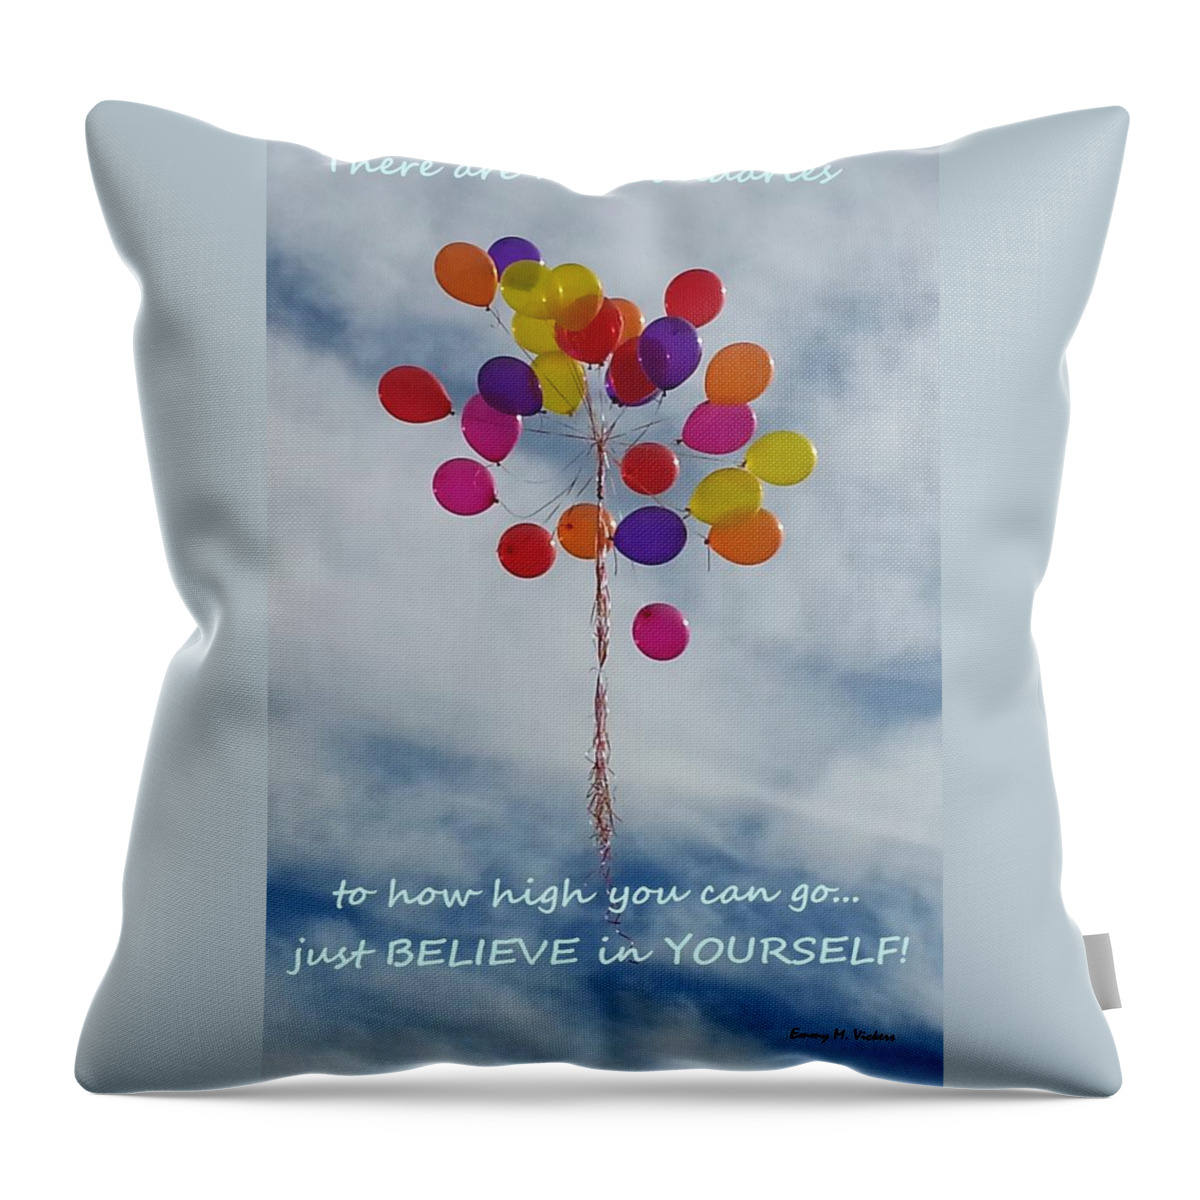 No Boundaries Throw Pillow featuring the photograph No Boundaries by Emmy Marie Vickers